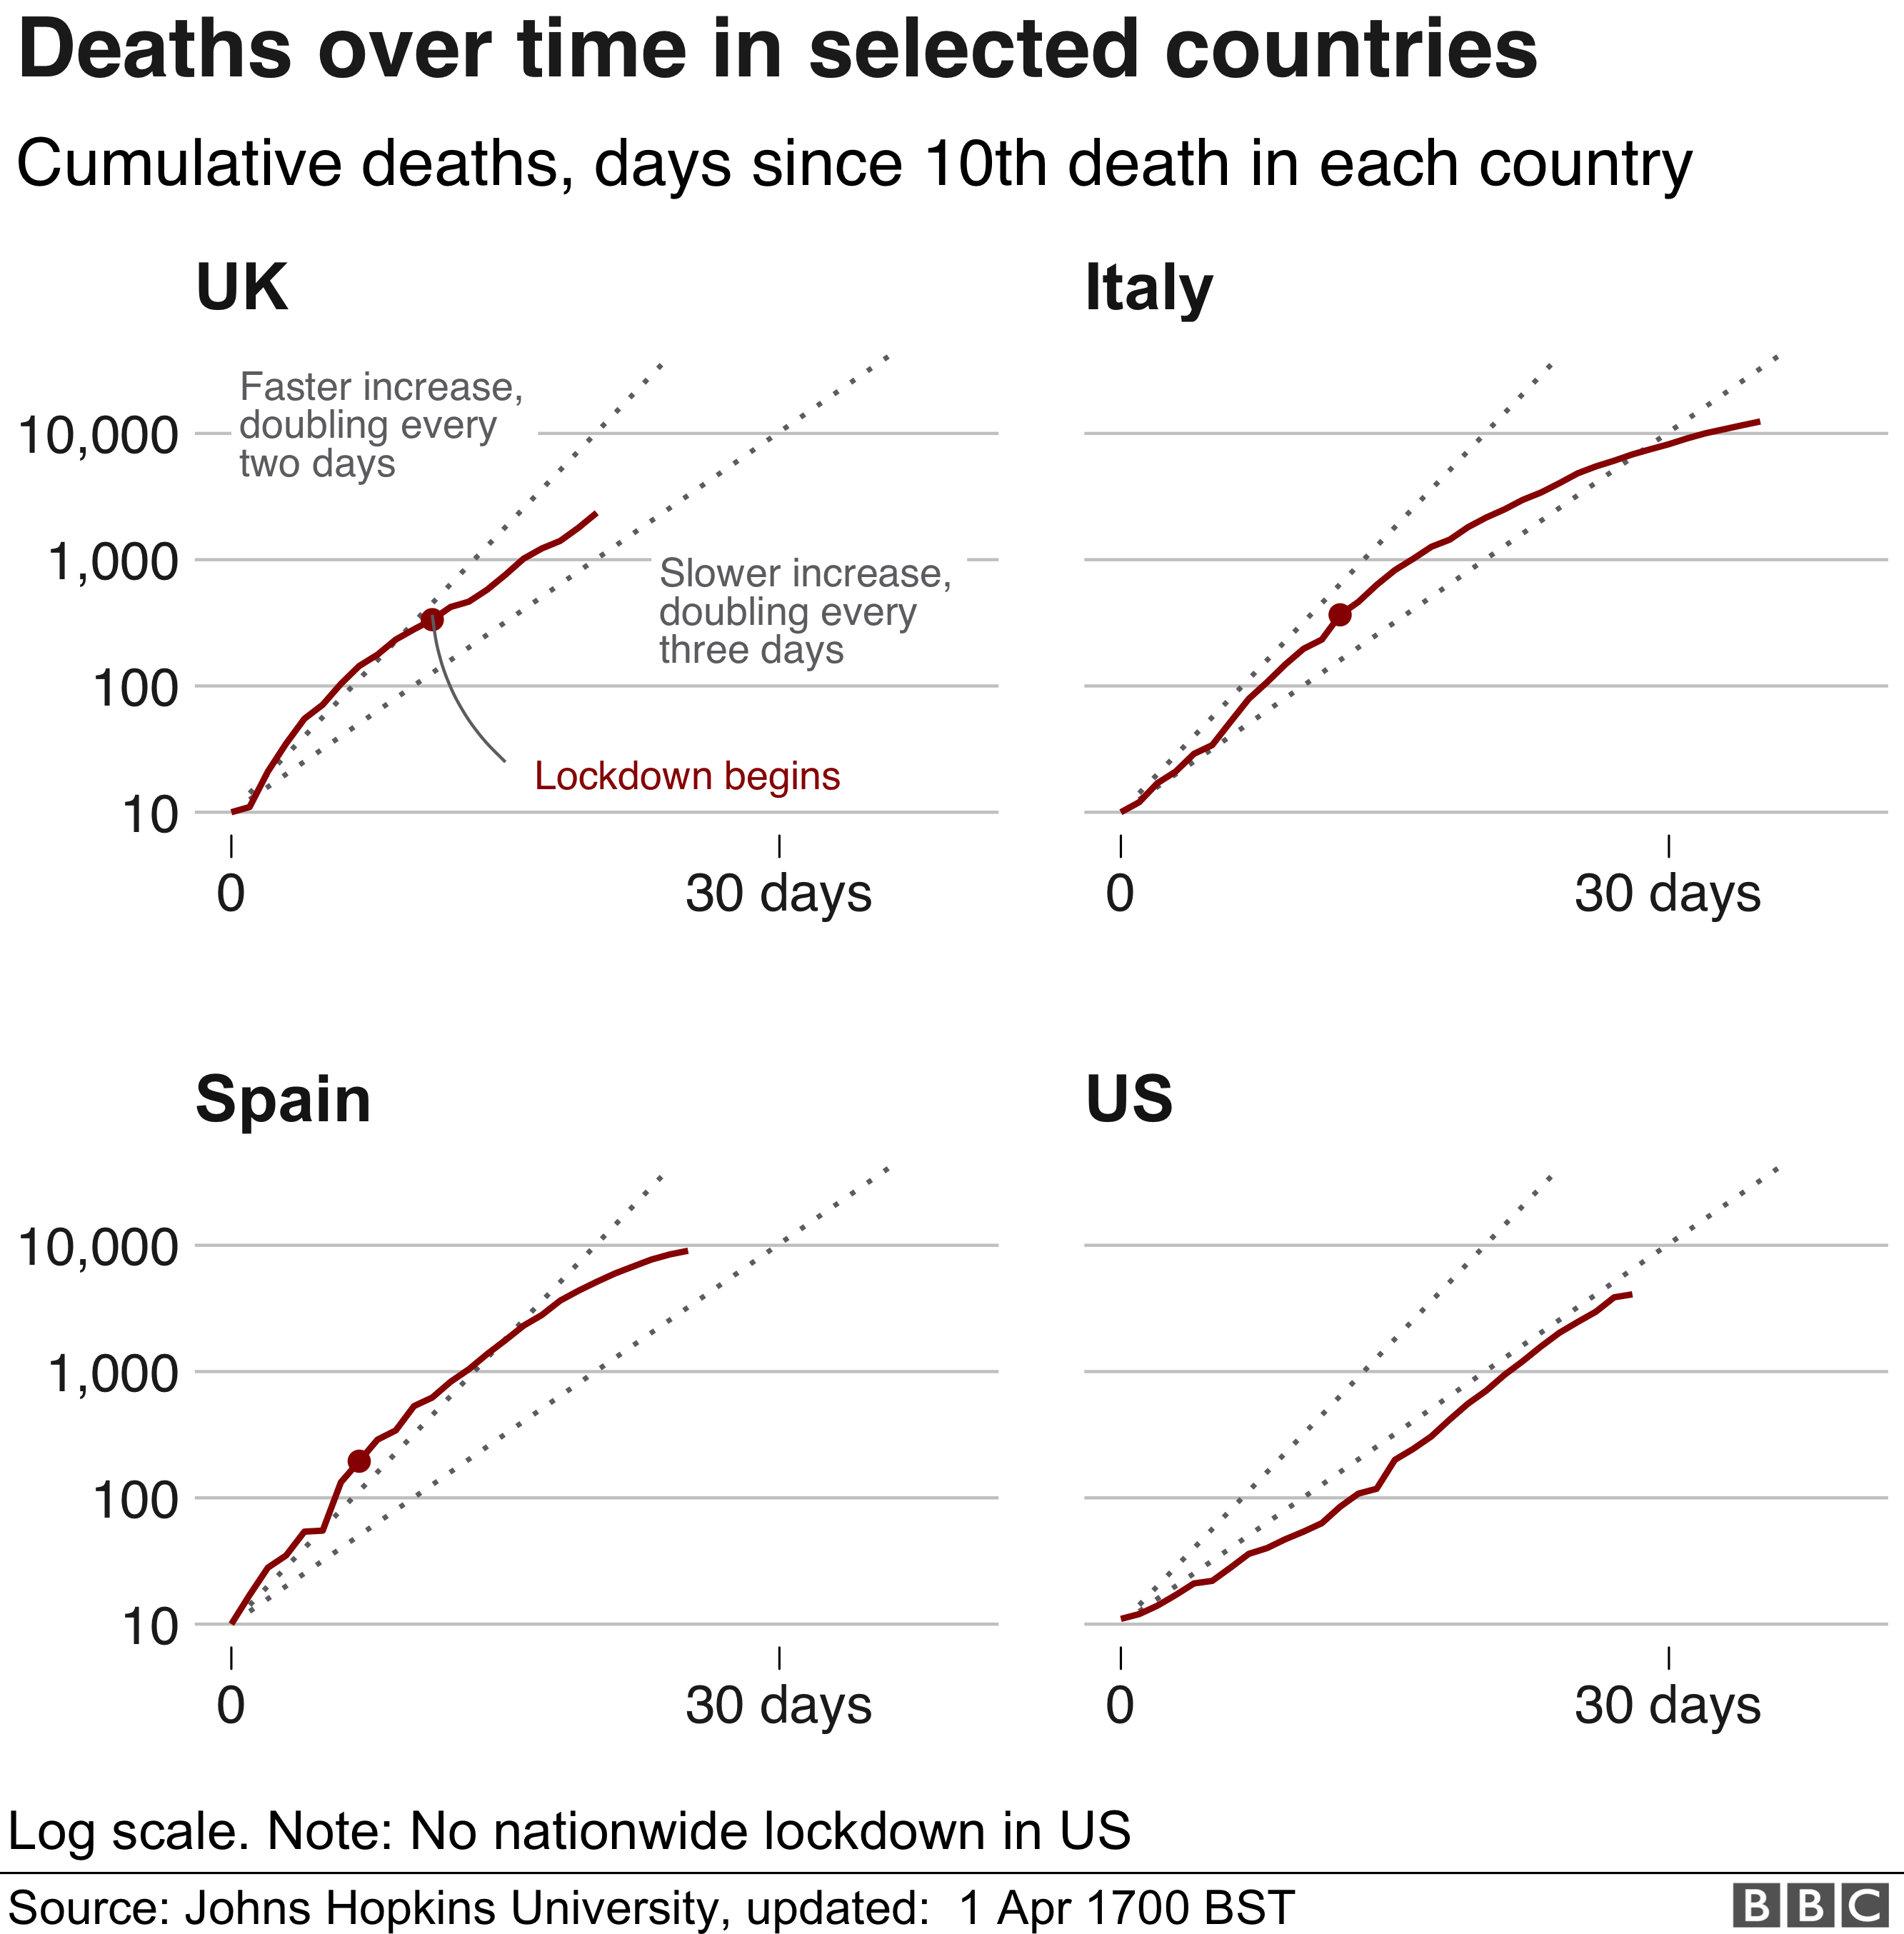 Chart showing deaths over time in selected countries